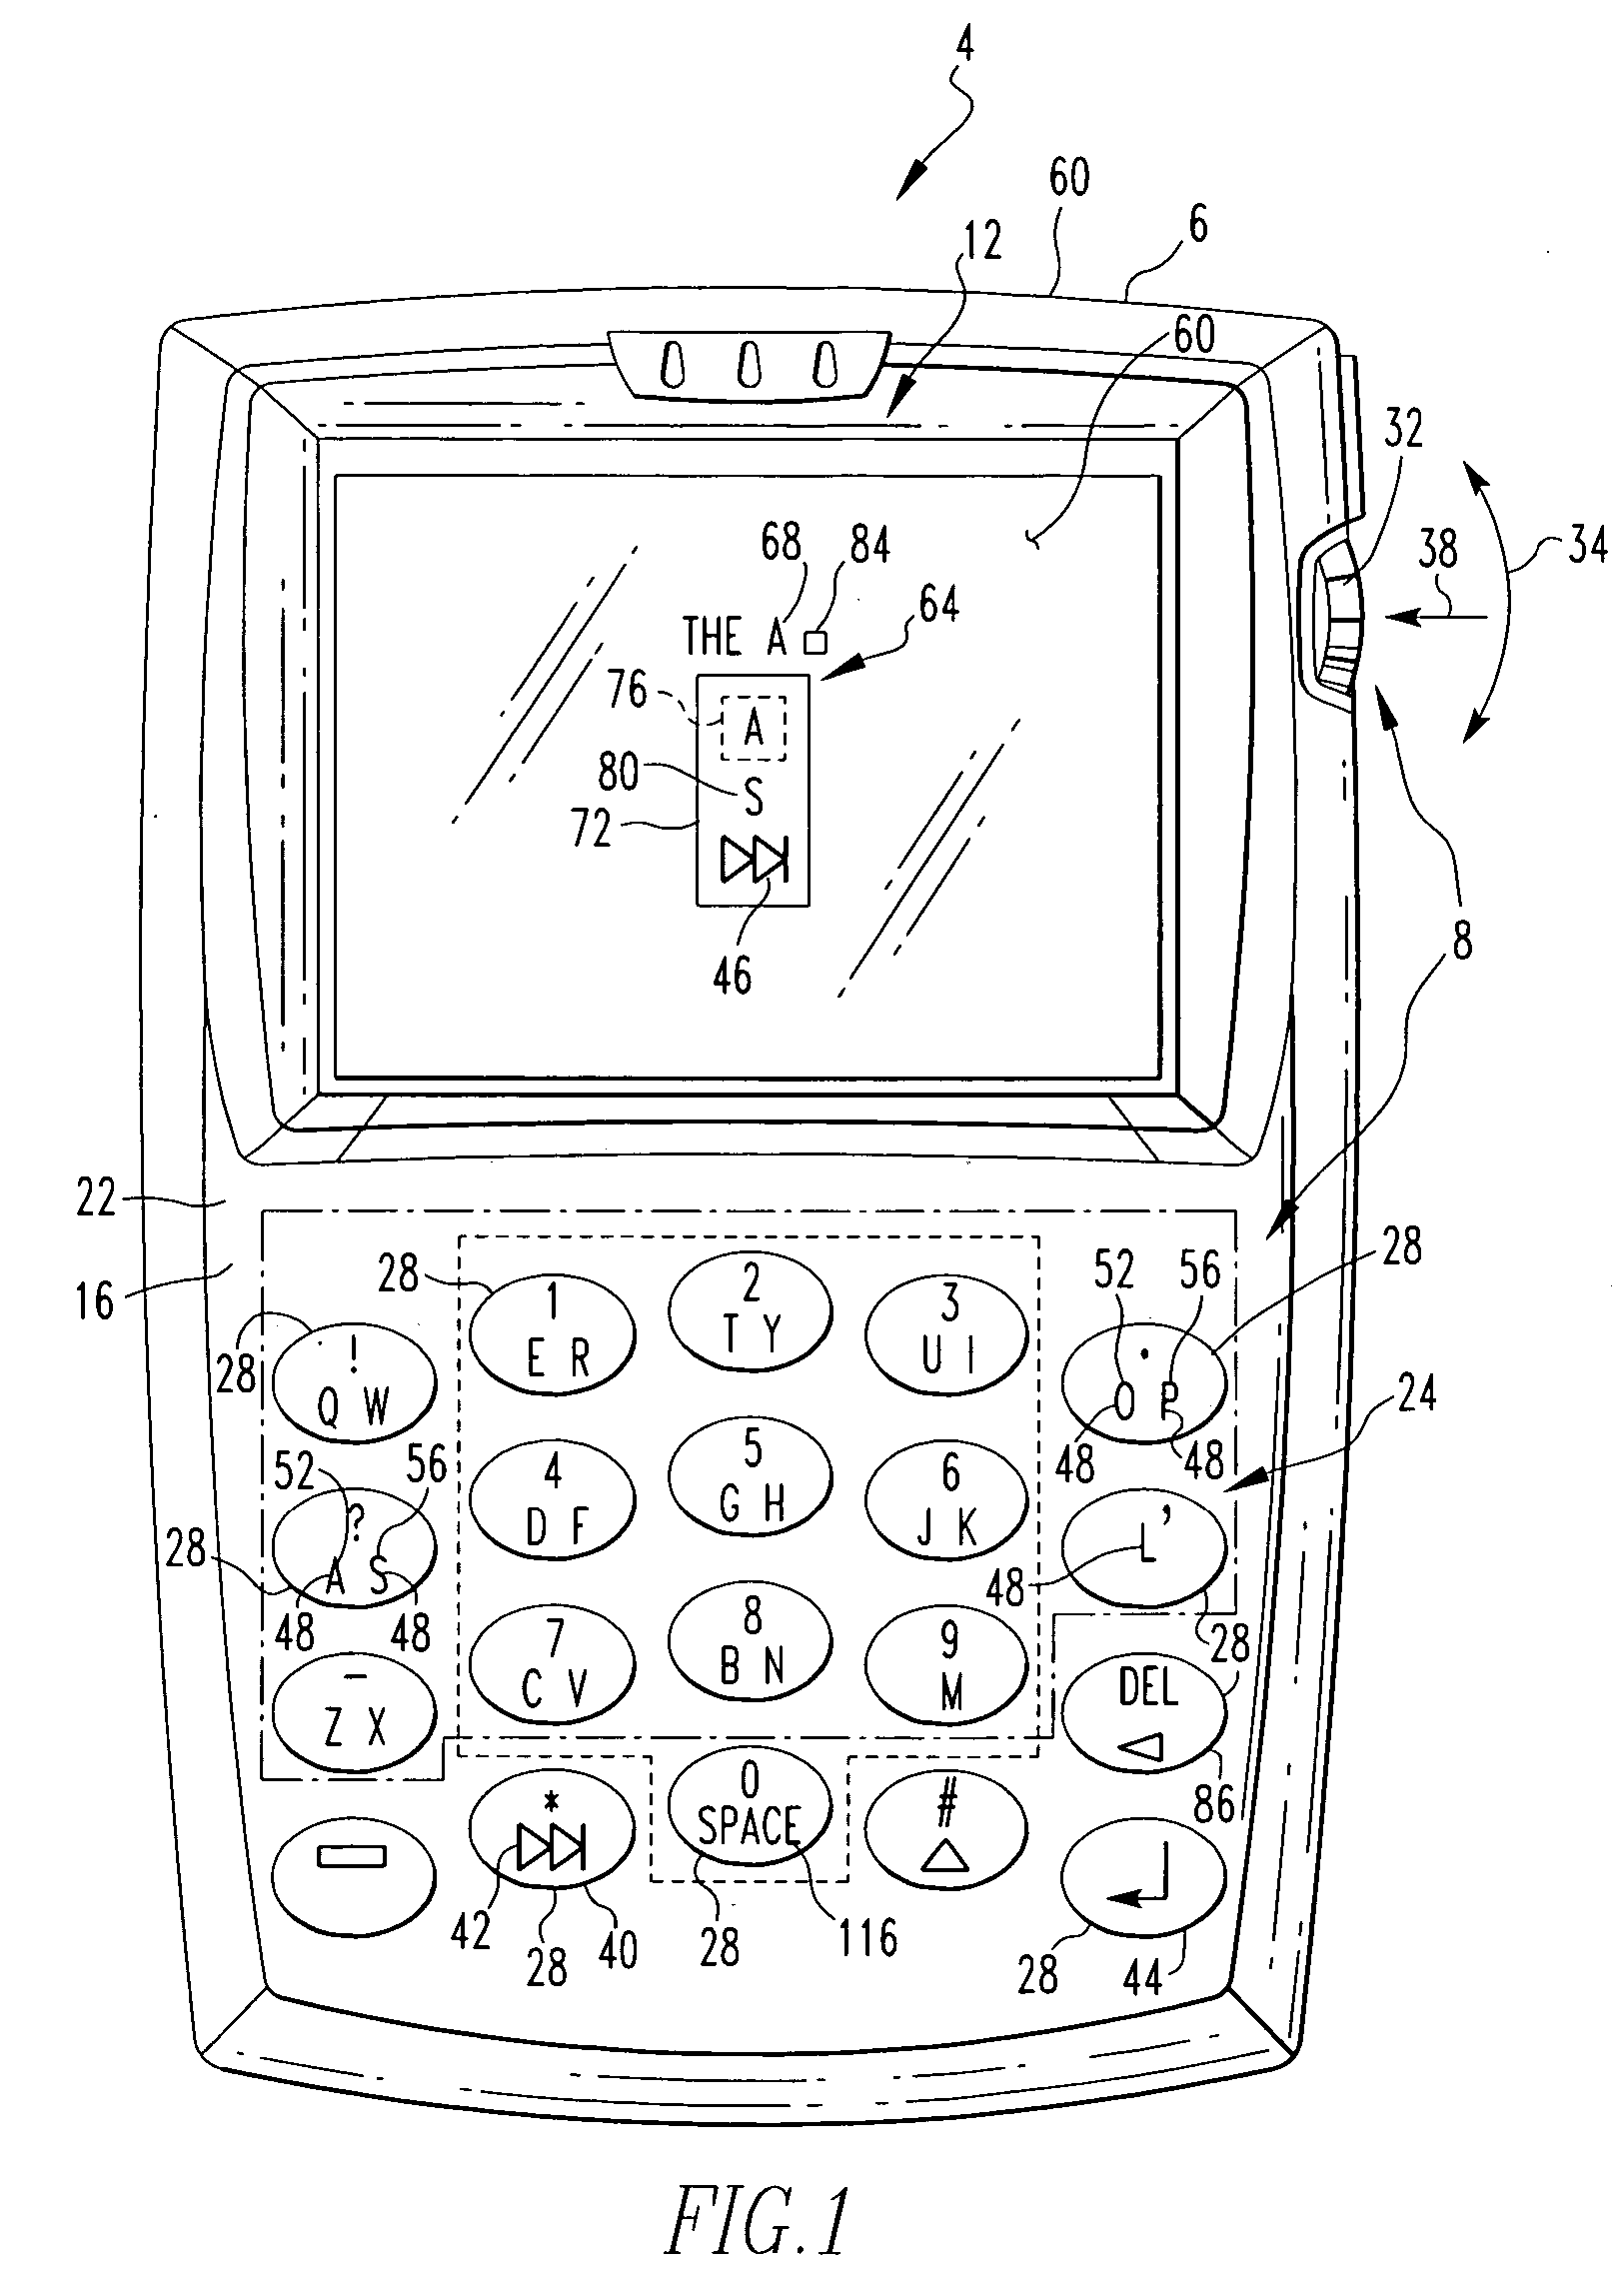 Handheld electronic device with text disambiquation employing advanced word frequency learning feature